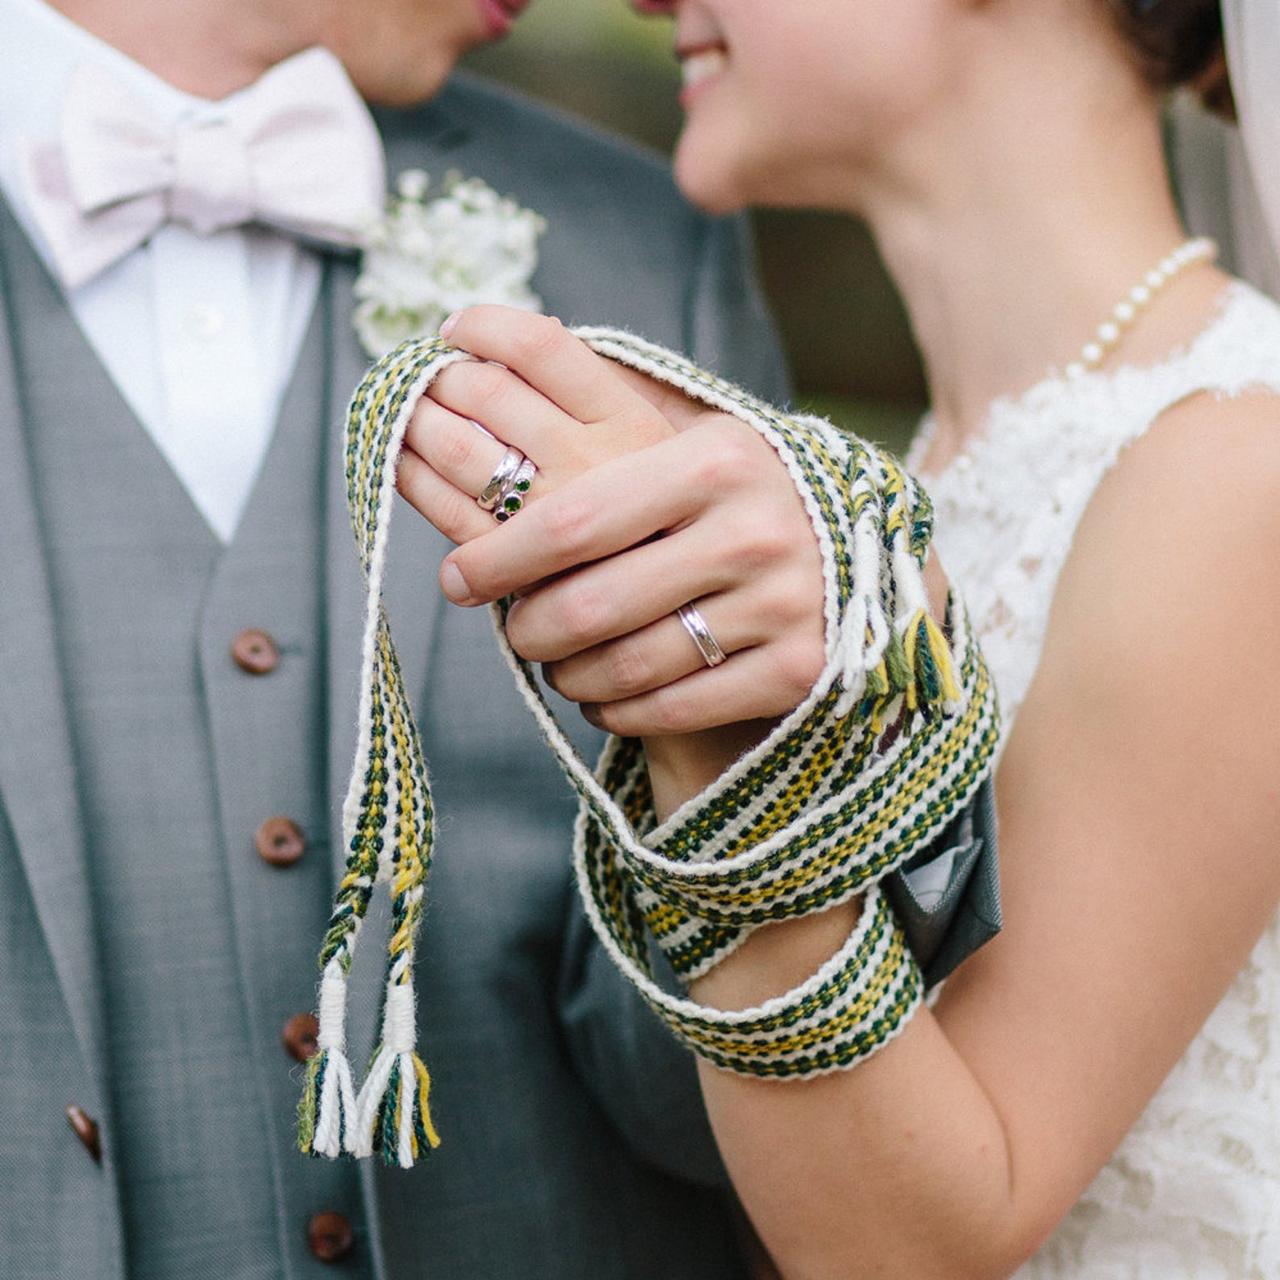 3 Easy Ways to Tie a Handfasting Cord - Choosing a Simple Knot